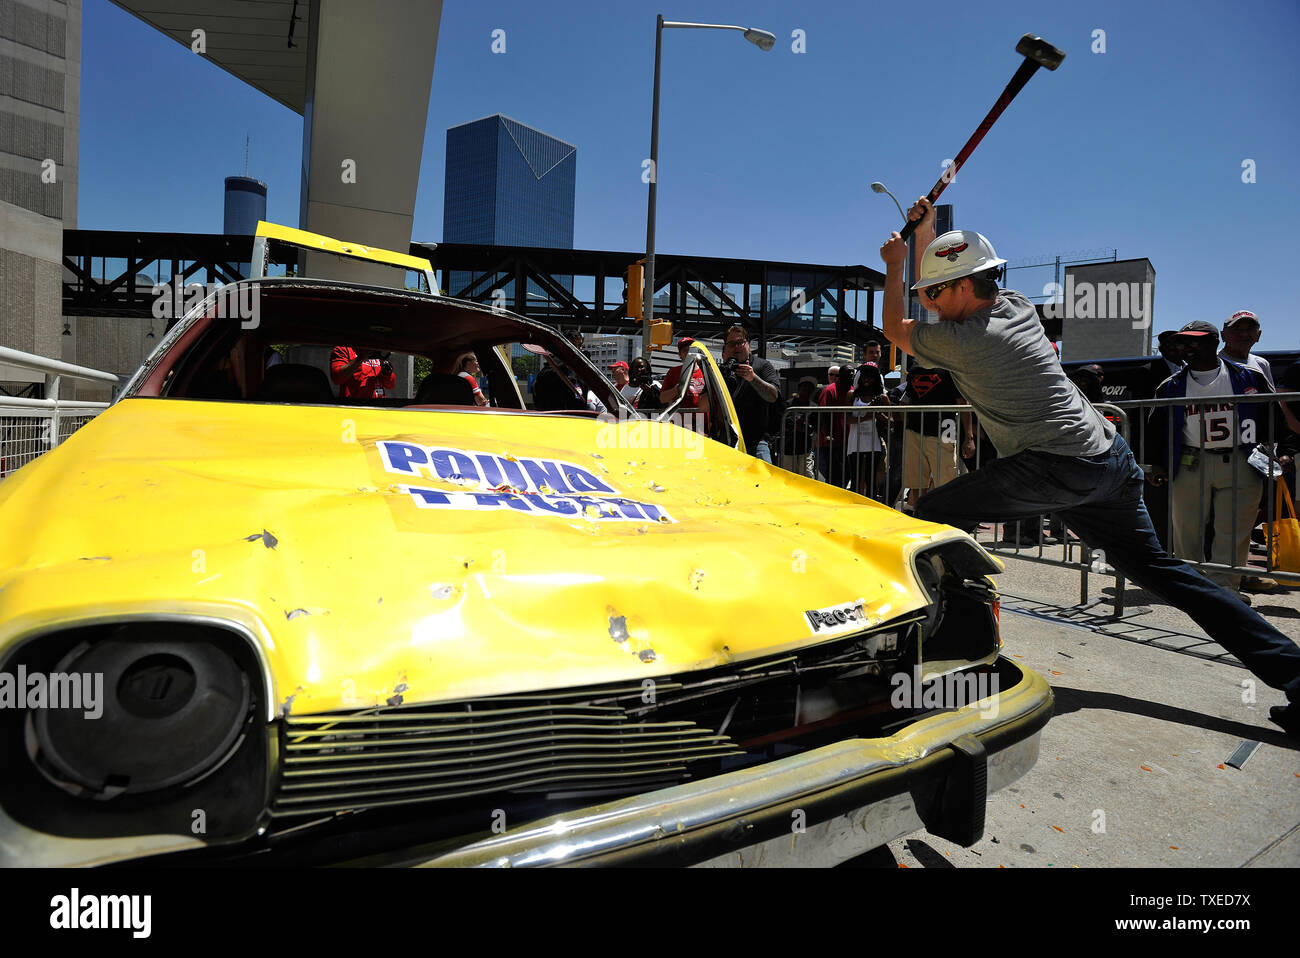 Mike King takes a sledge hammer to a 1976 AMC Pacer automobile for a charity promotion before Game 4 of the Atlanta Hawks and Indiana Pacers Eastern Conference NBA playoff series at Philips Arena in Atlanta, April 26, 2013. UPI/David Tulis Stock Photo